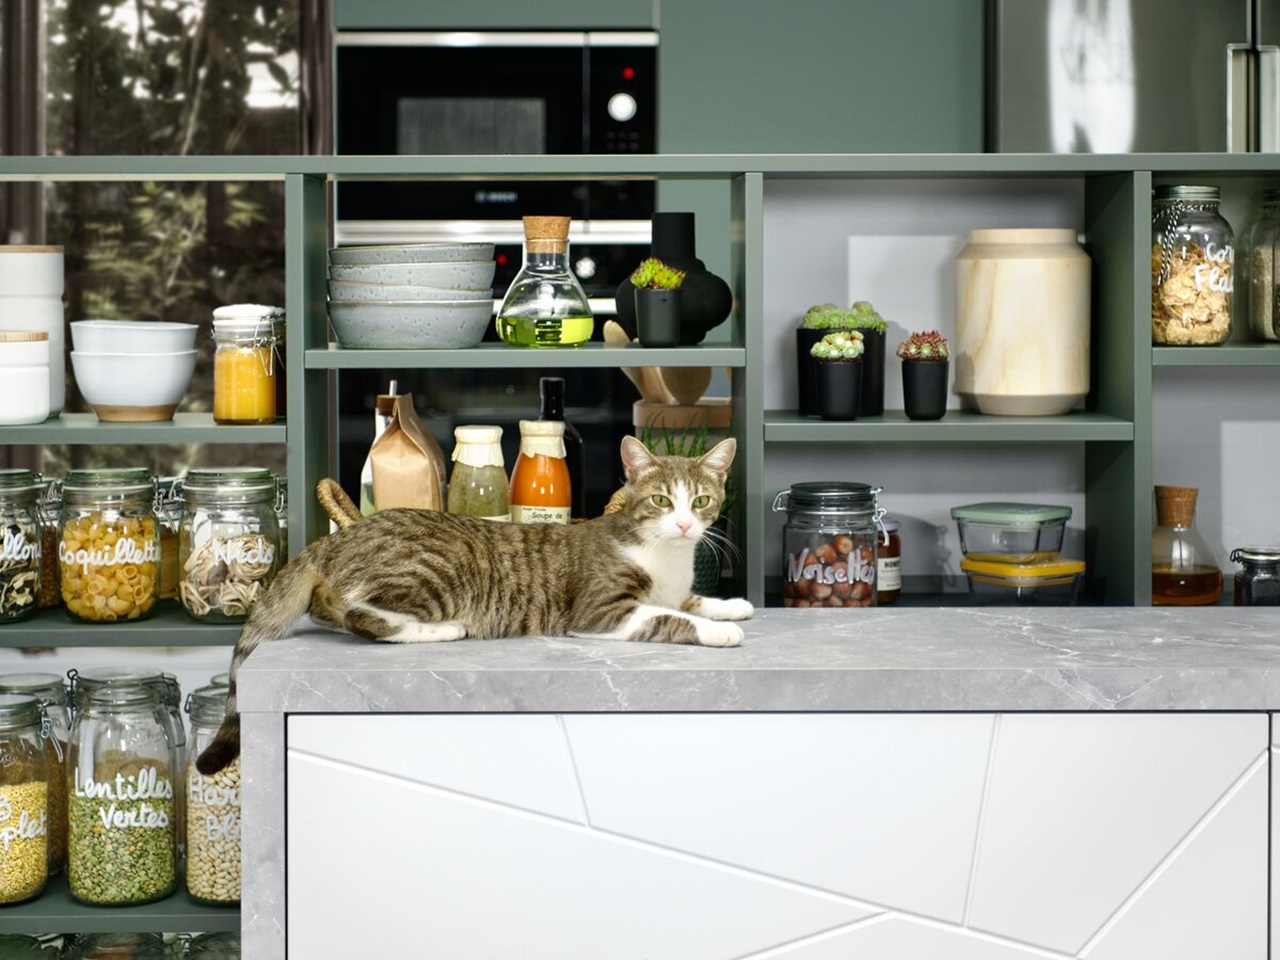 Ideal worktop for being watched by your cat